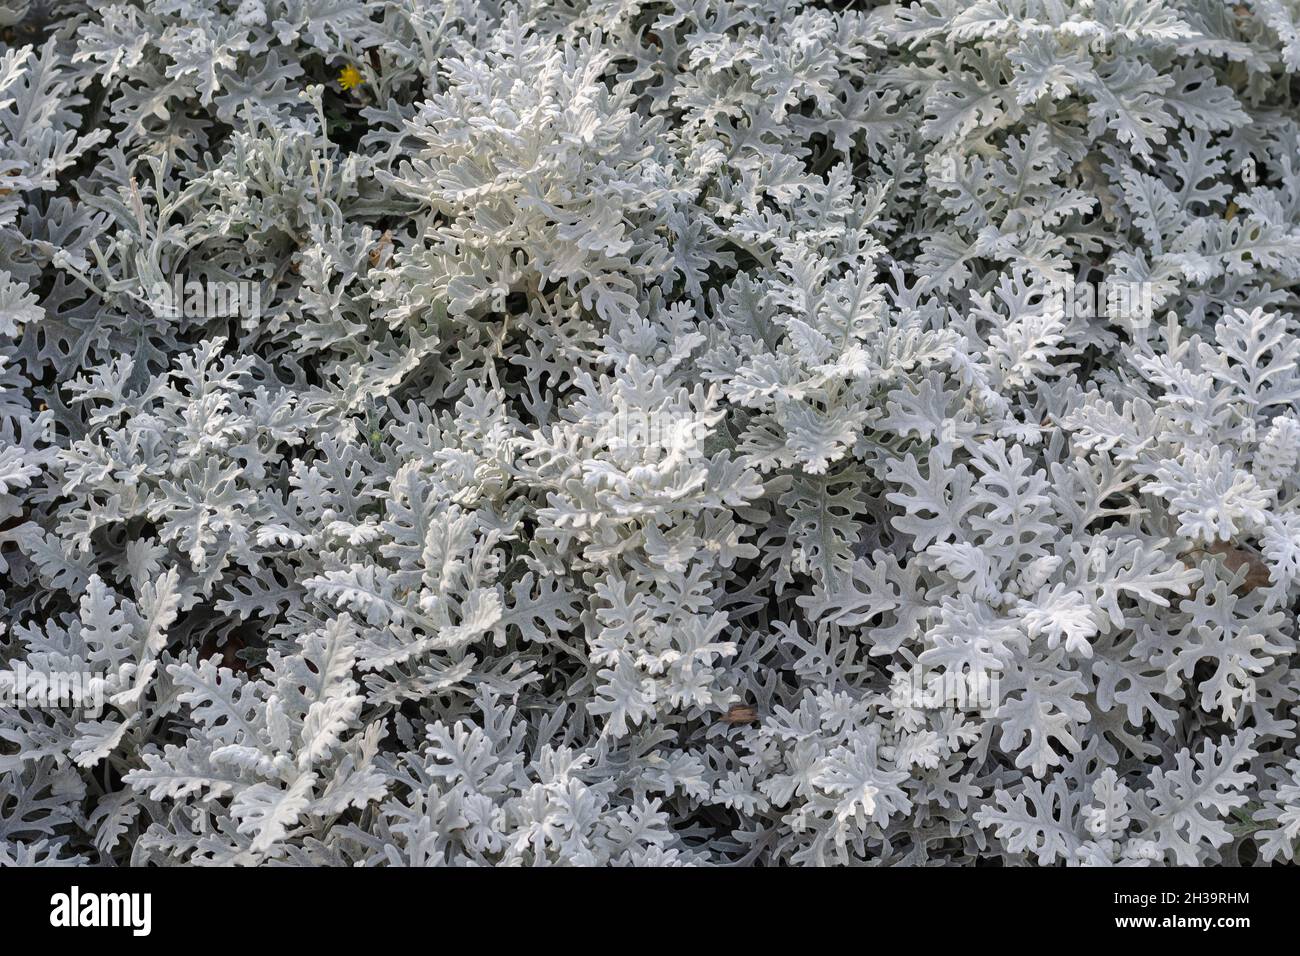 Jacobaea maritima, Dusty miller, Silver dust or Silver ragwort. Full frame of gray-silver leaves of the ornamental plant. Top view. Stock Photo